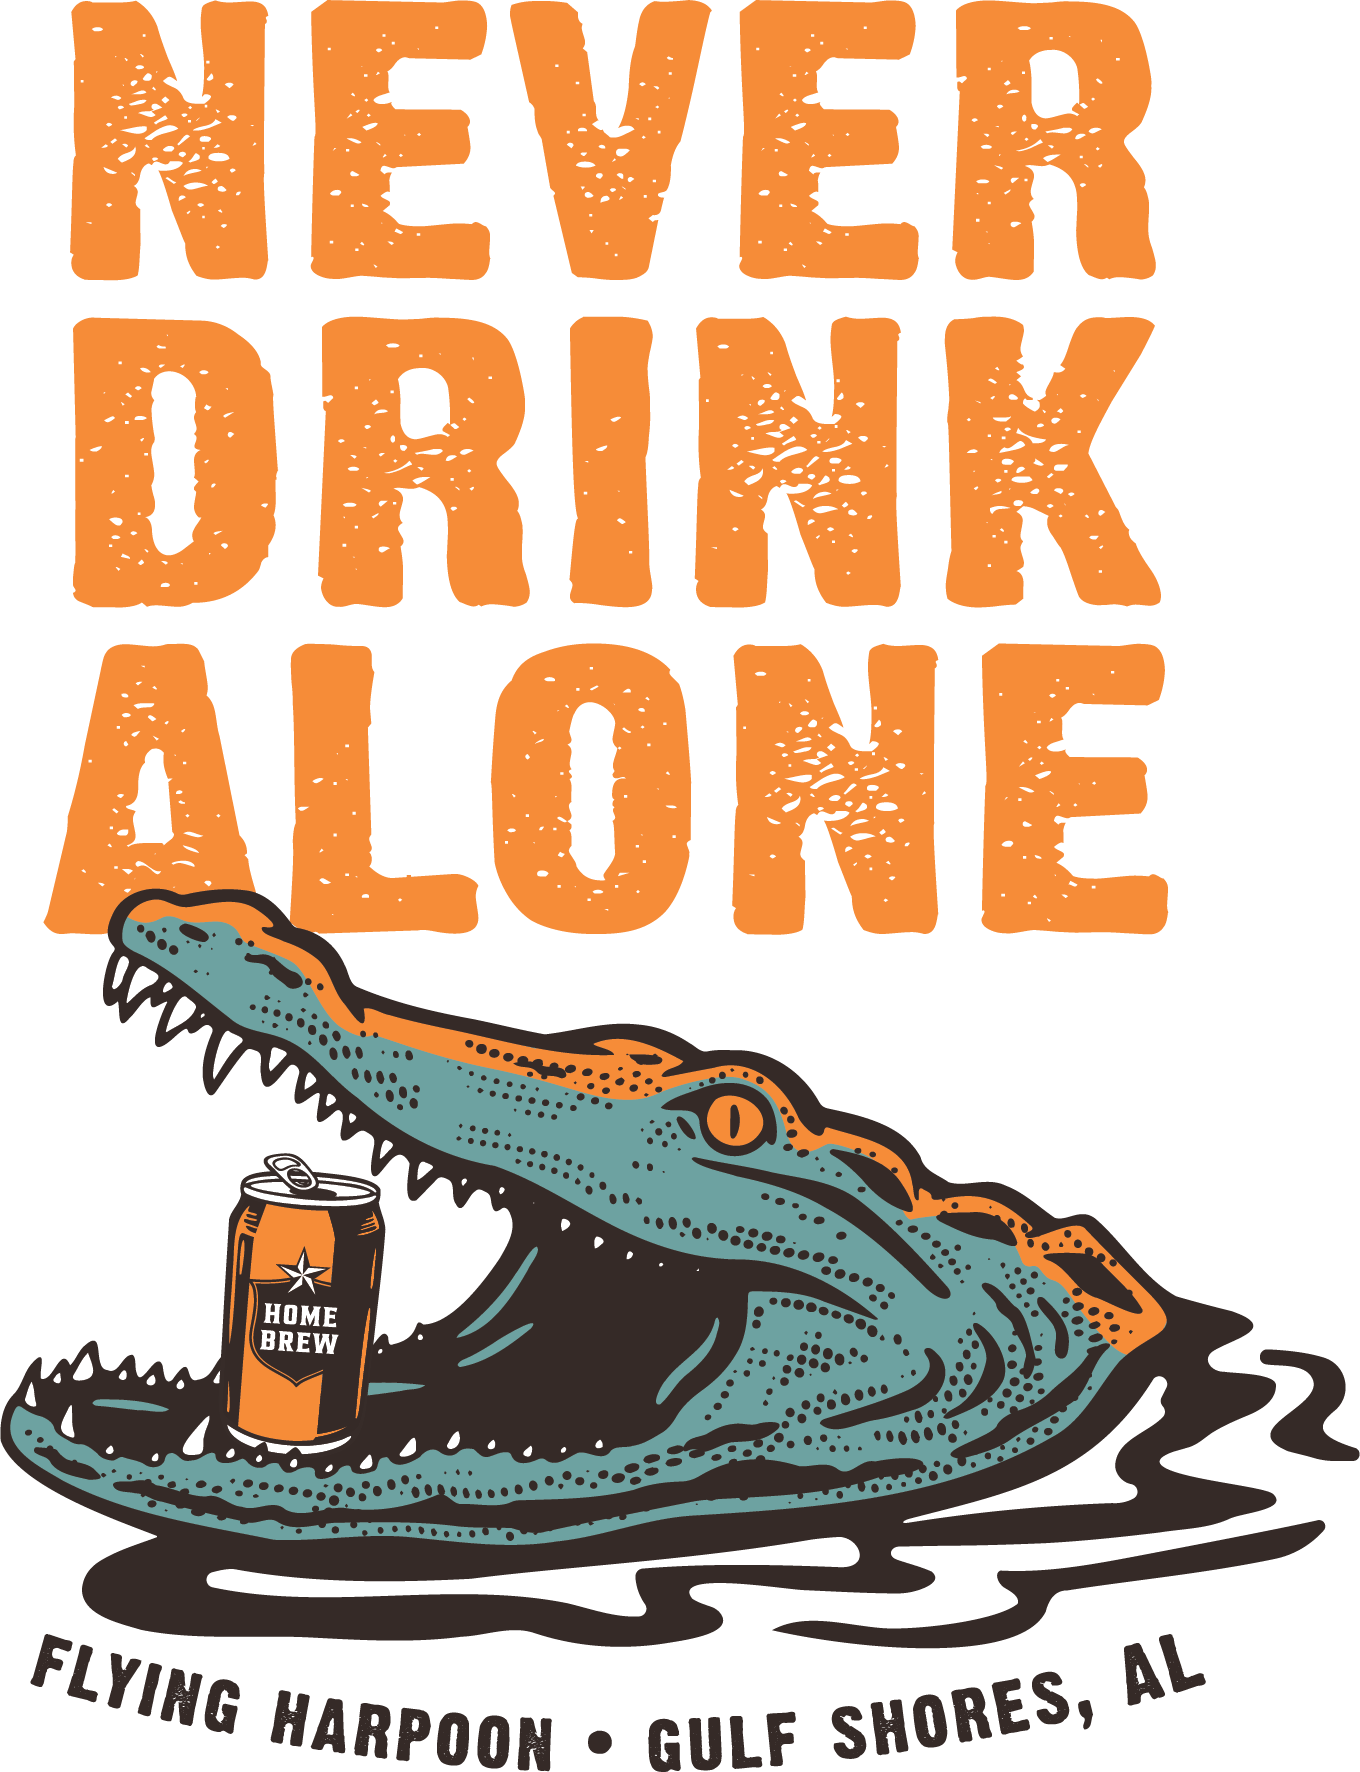 Never Drink Alone Tee